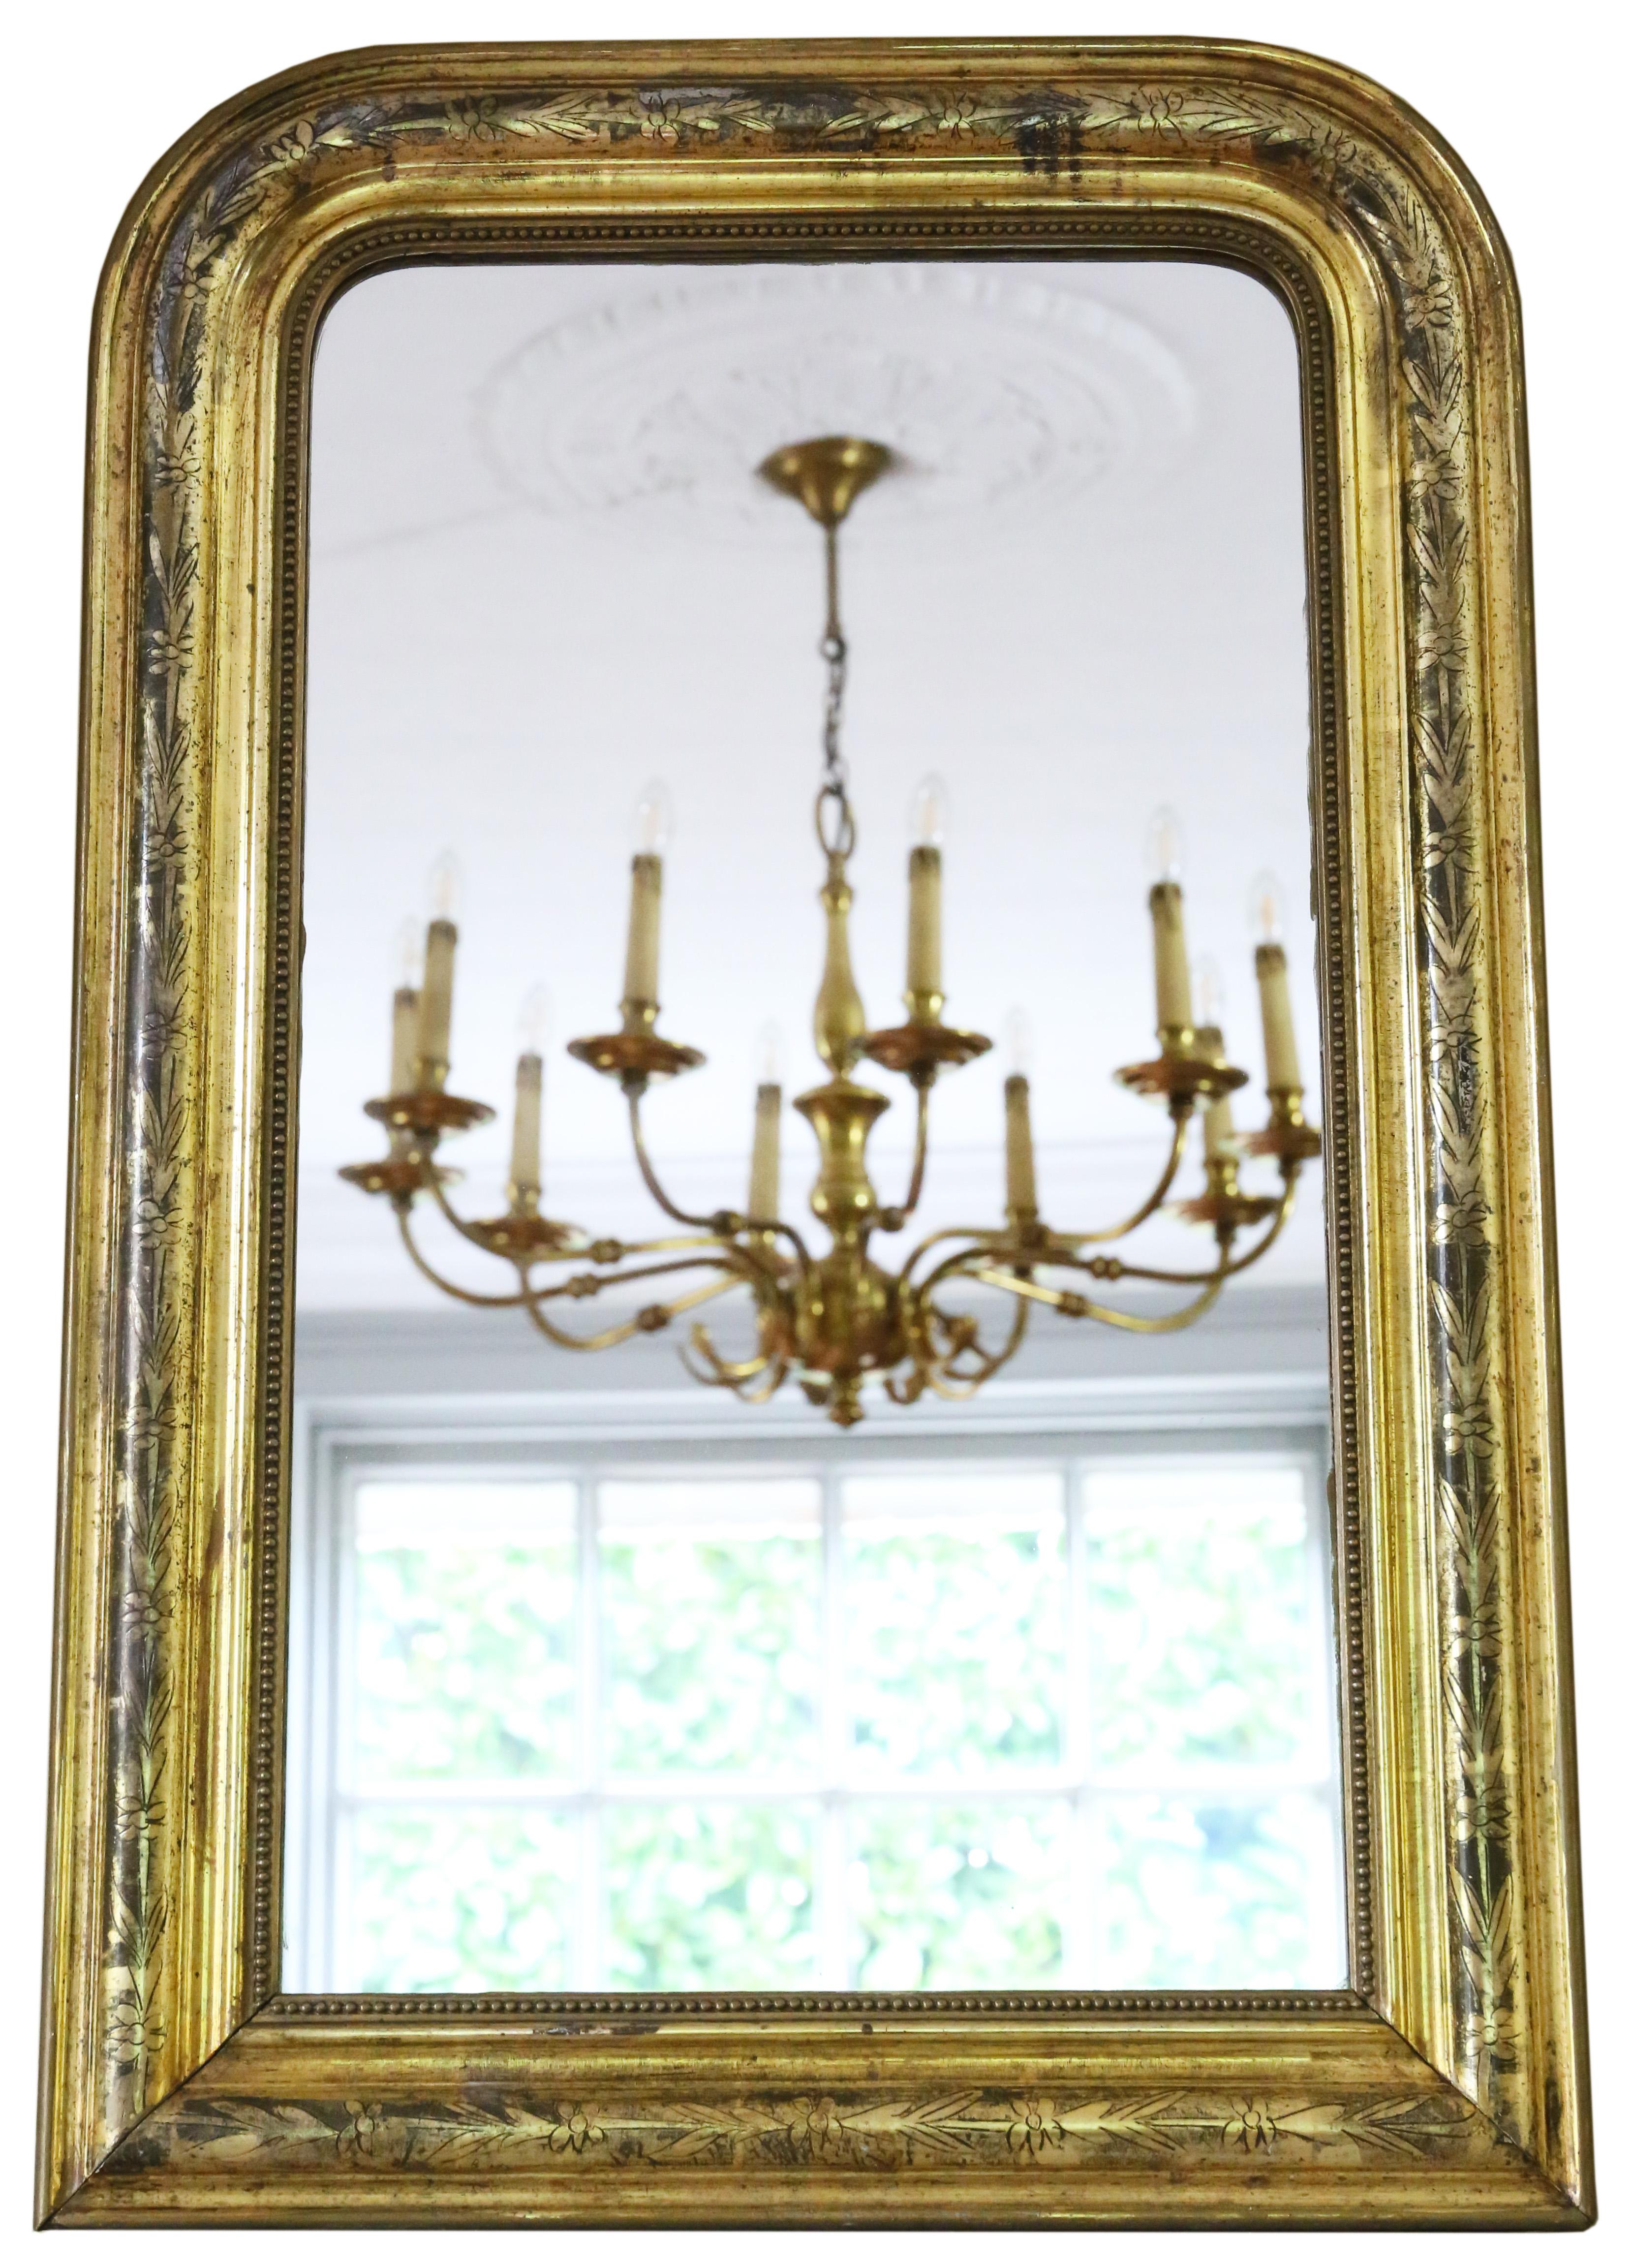 Antique 19th Century gilt Louis Philippe overmantle or wall mirror, showcasing delightful charm and elegance. The original finish, with minor losses, refinishing, and careful touching up, adds to its character.

This impressive find would grace any